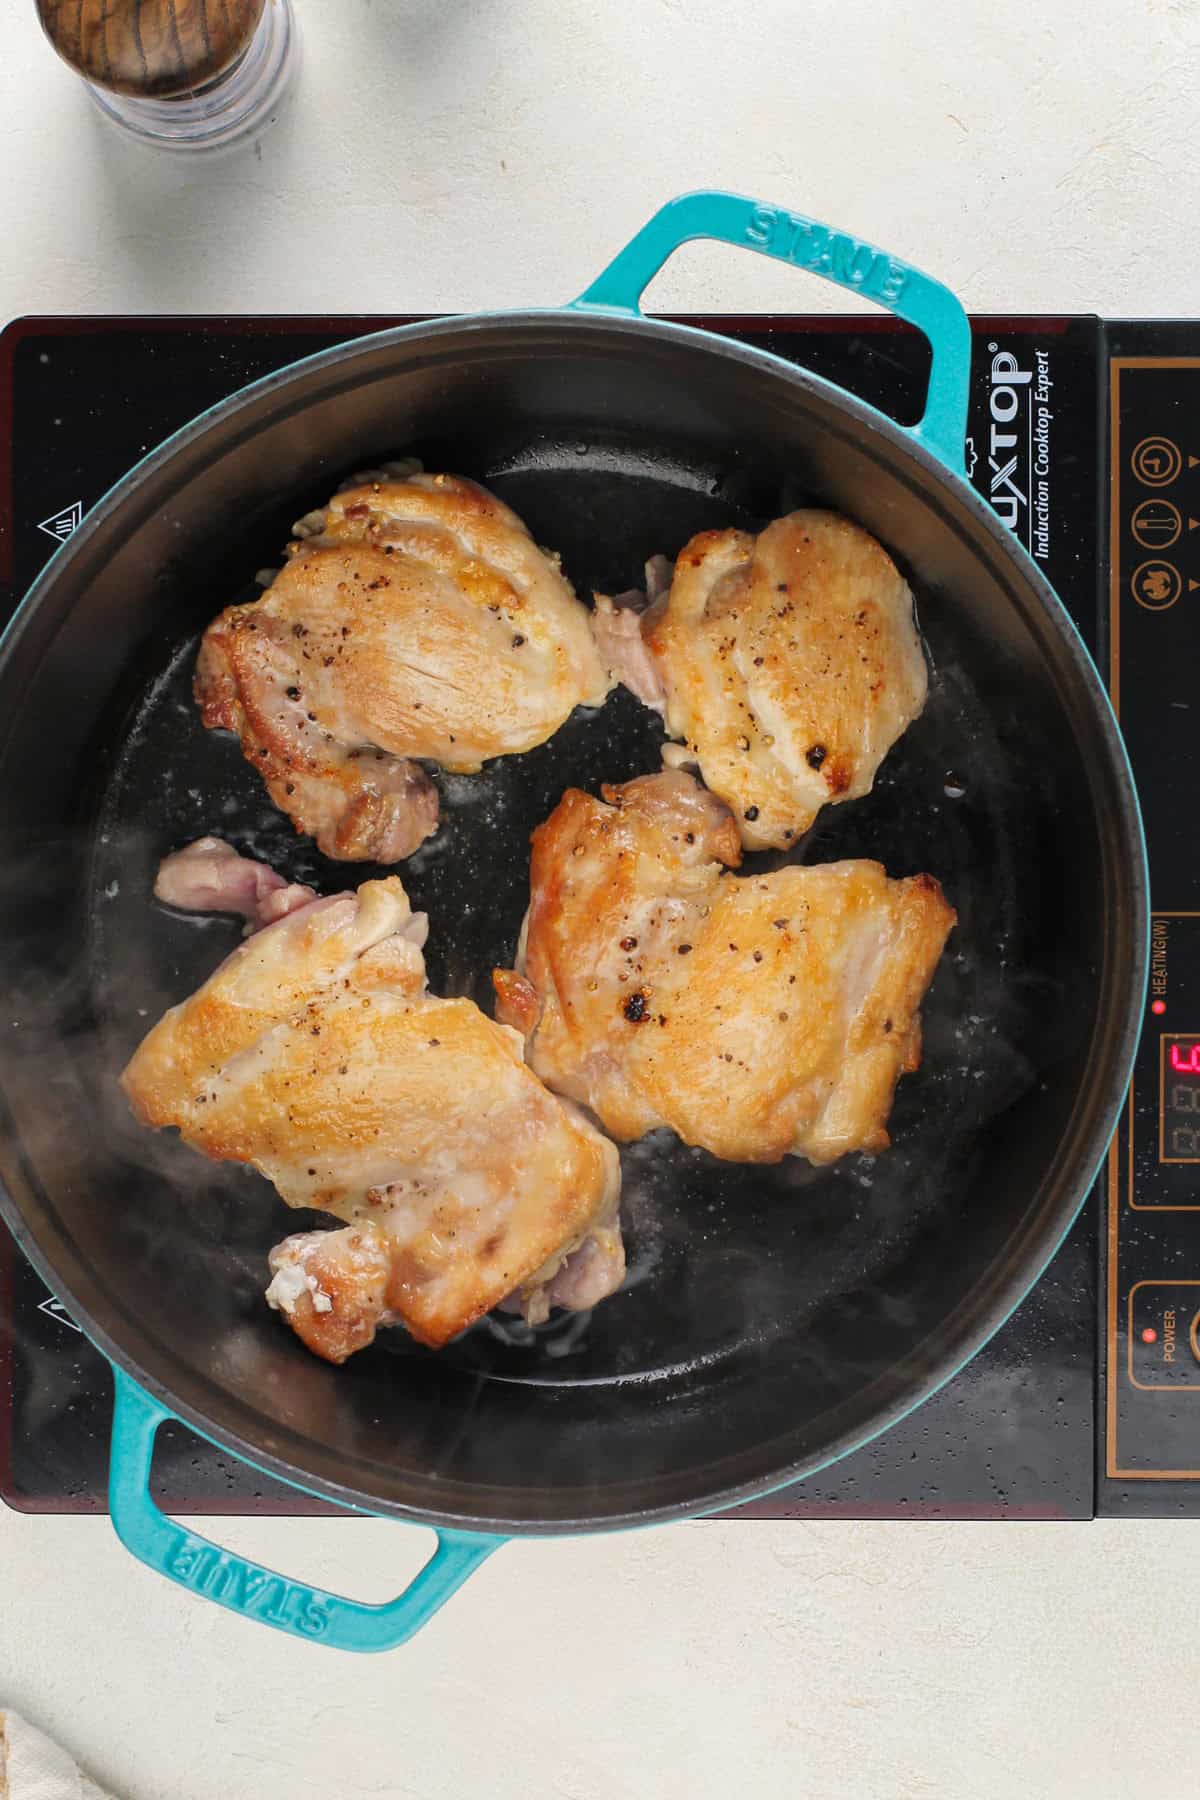 Seared chicken thighs in a dutch oven.